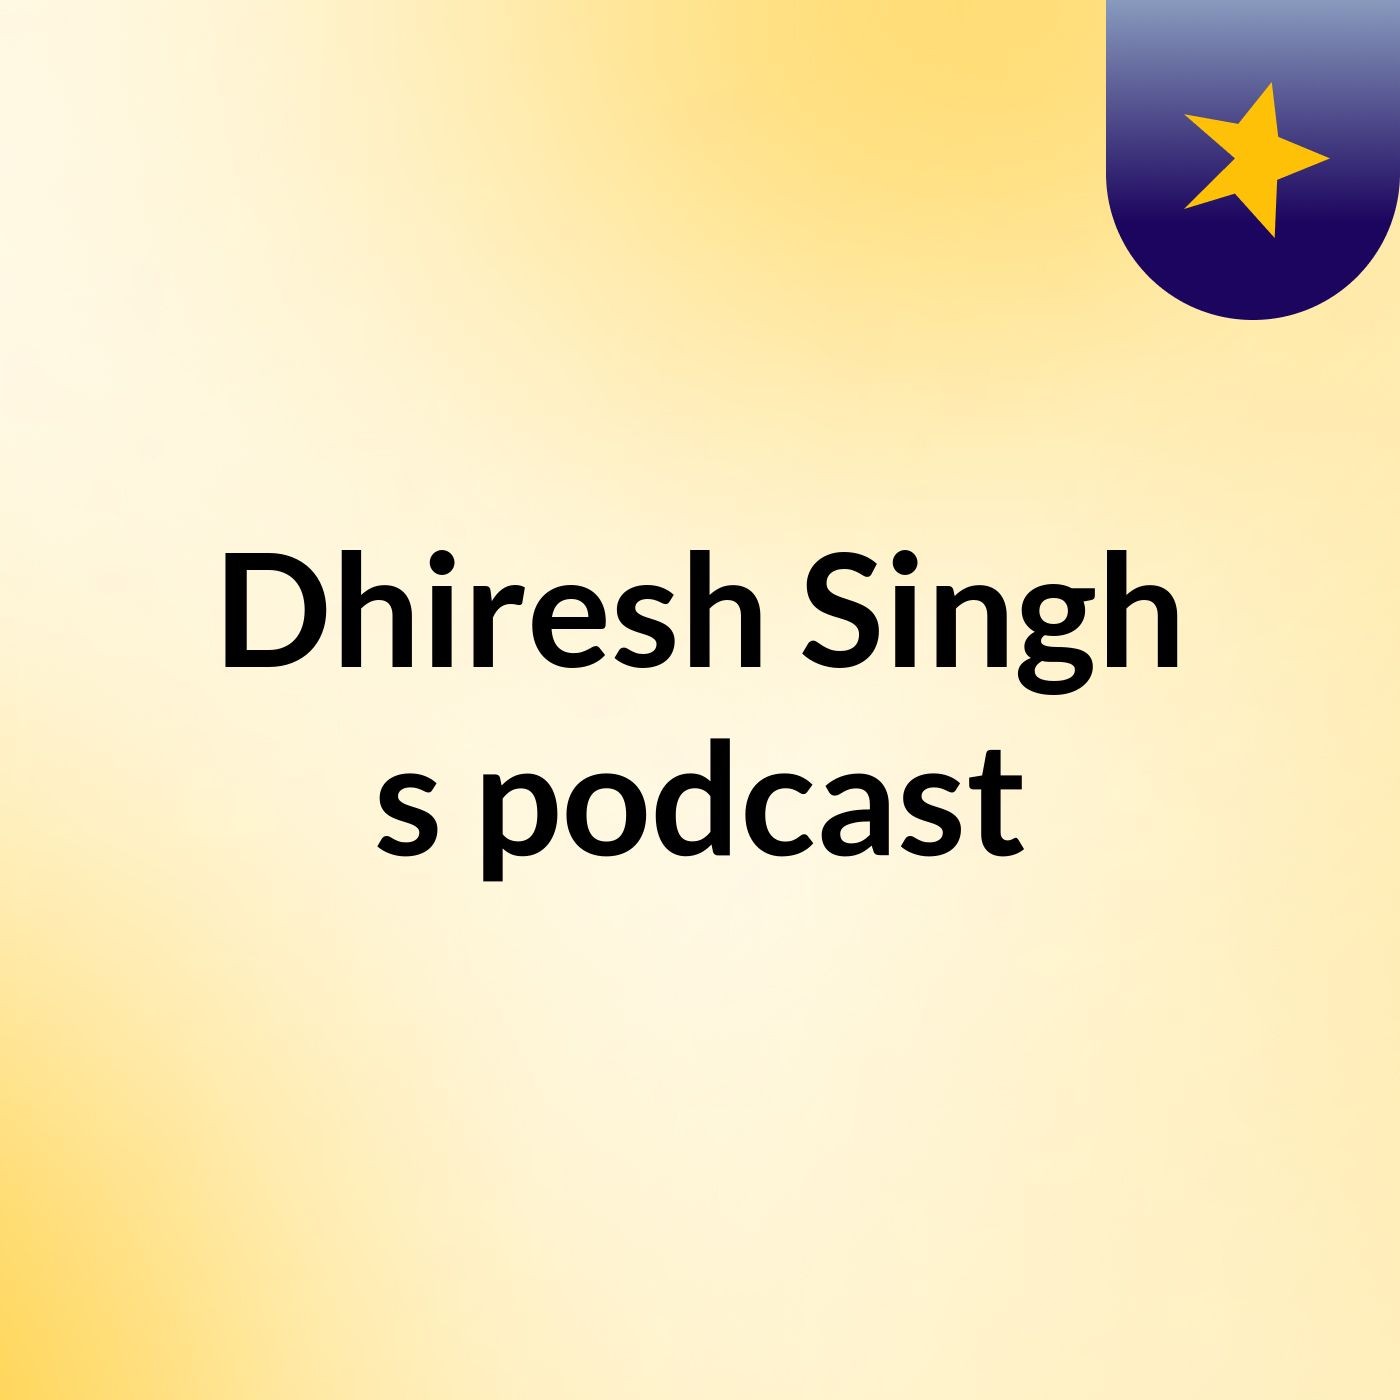 Dhiresh Singh's podcast